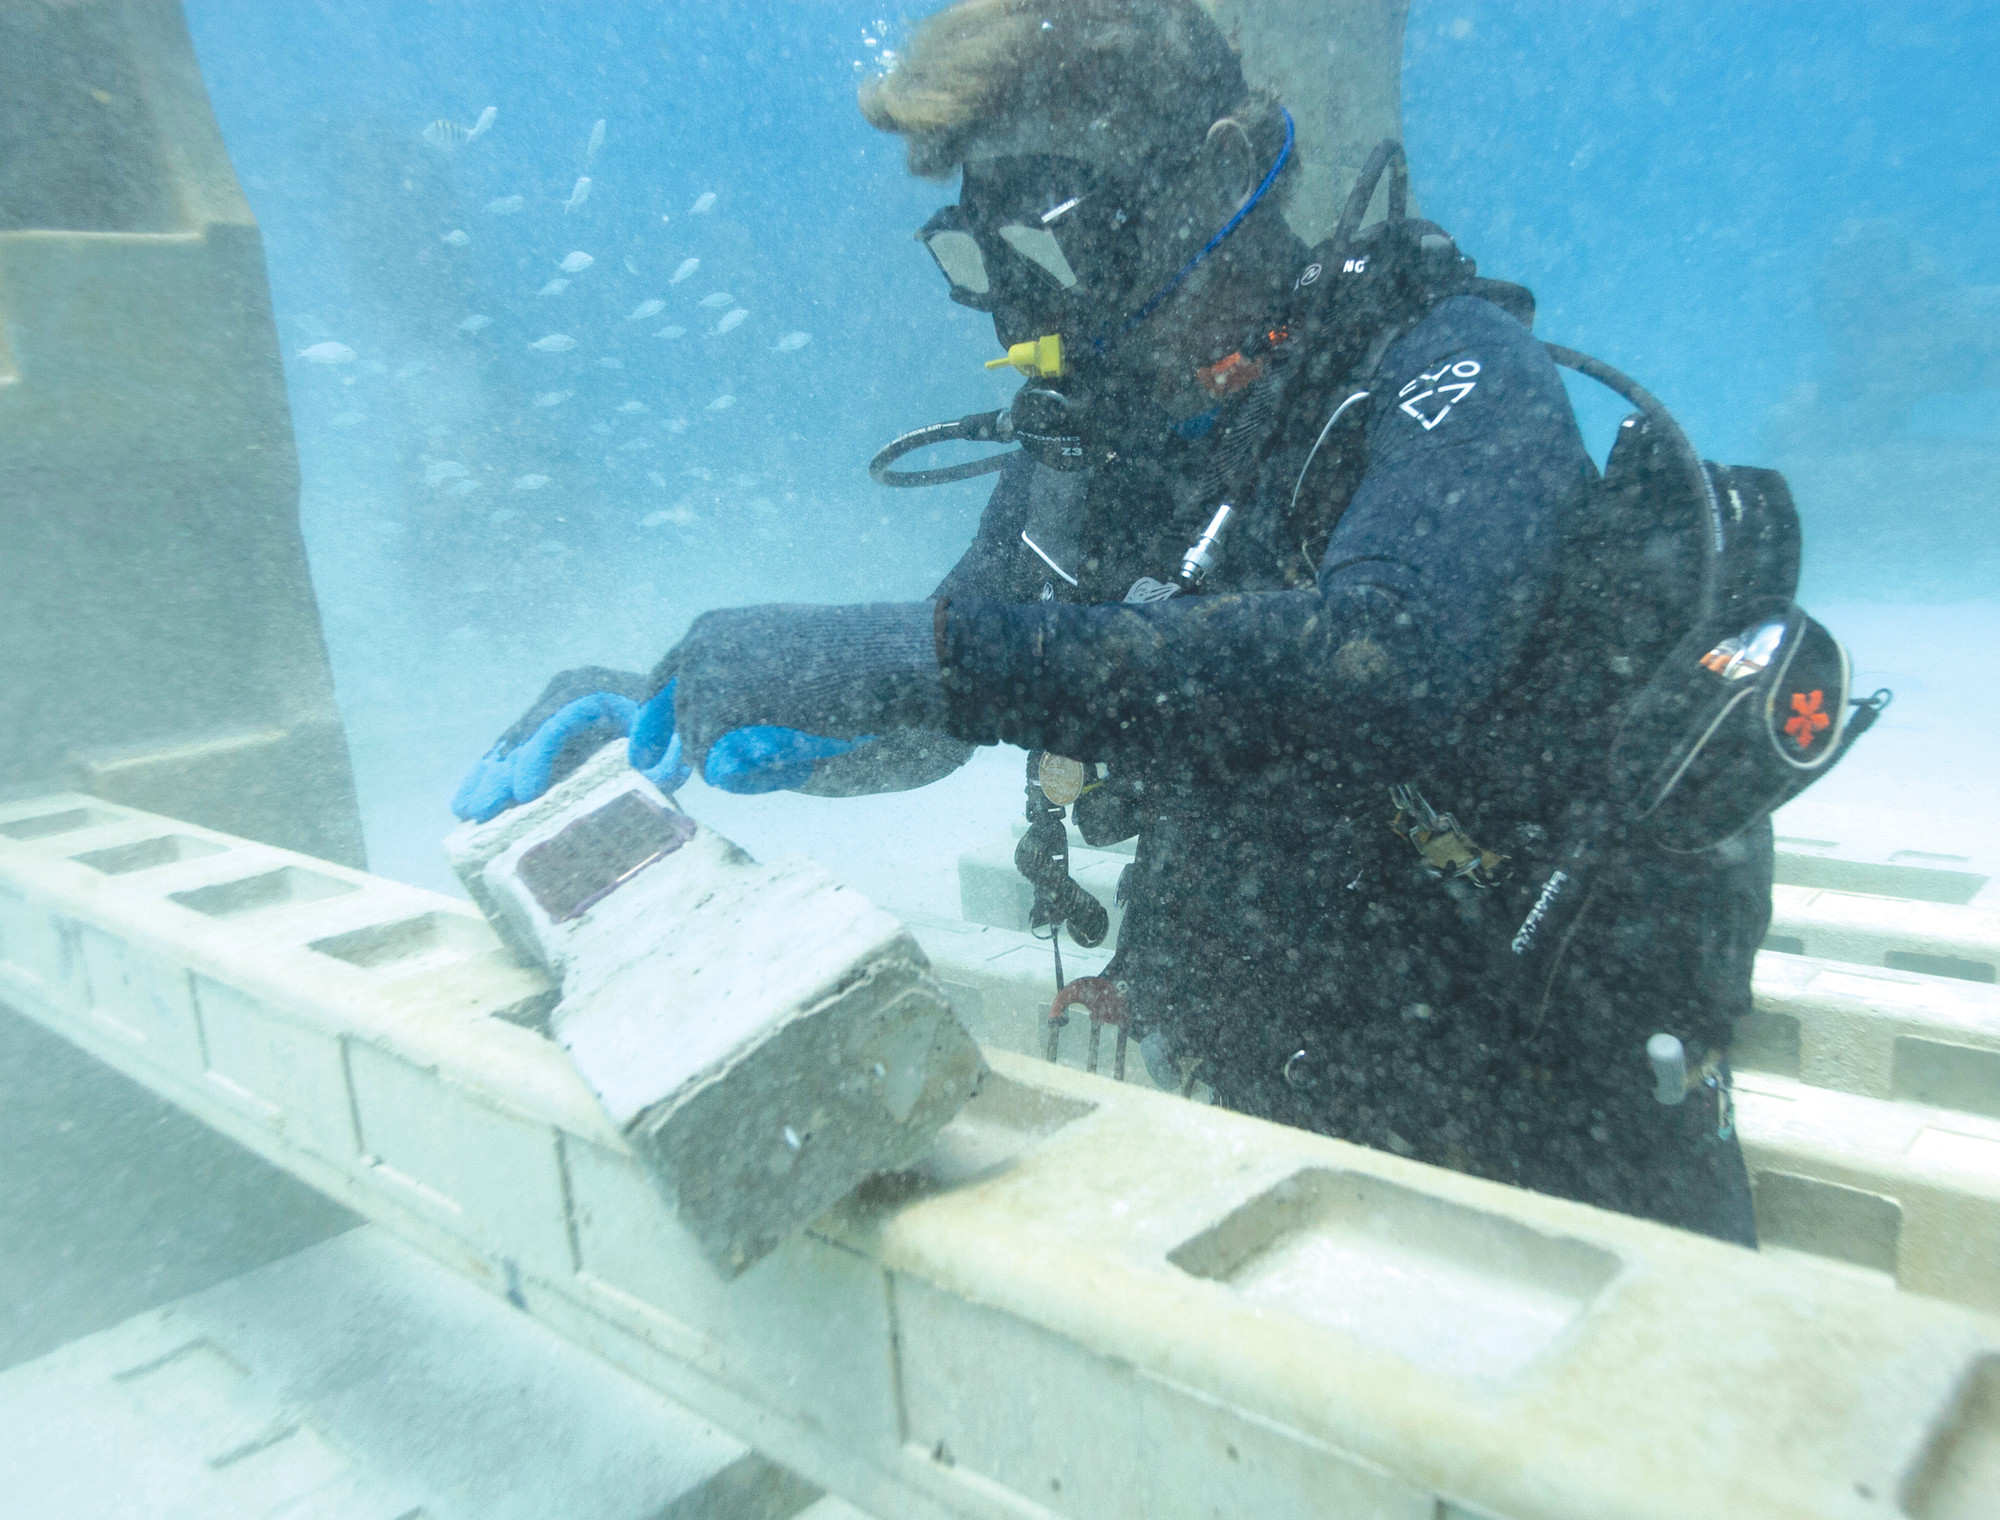 Jim Hutslar, operations director for Neptune Memorial Reef, prepares to install a memorial plaque for Buel and Linda Payne, affixed to a cement baluster mixed with their ashes, at the Neptune Memorial Reef near Miami Beach. The cemetery is already home to the cremated remains of about 1,500 people and is welcoming thousands more seeking life in the afterlife.